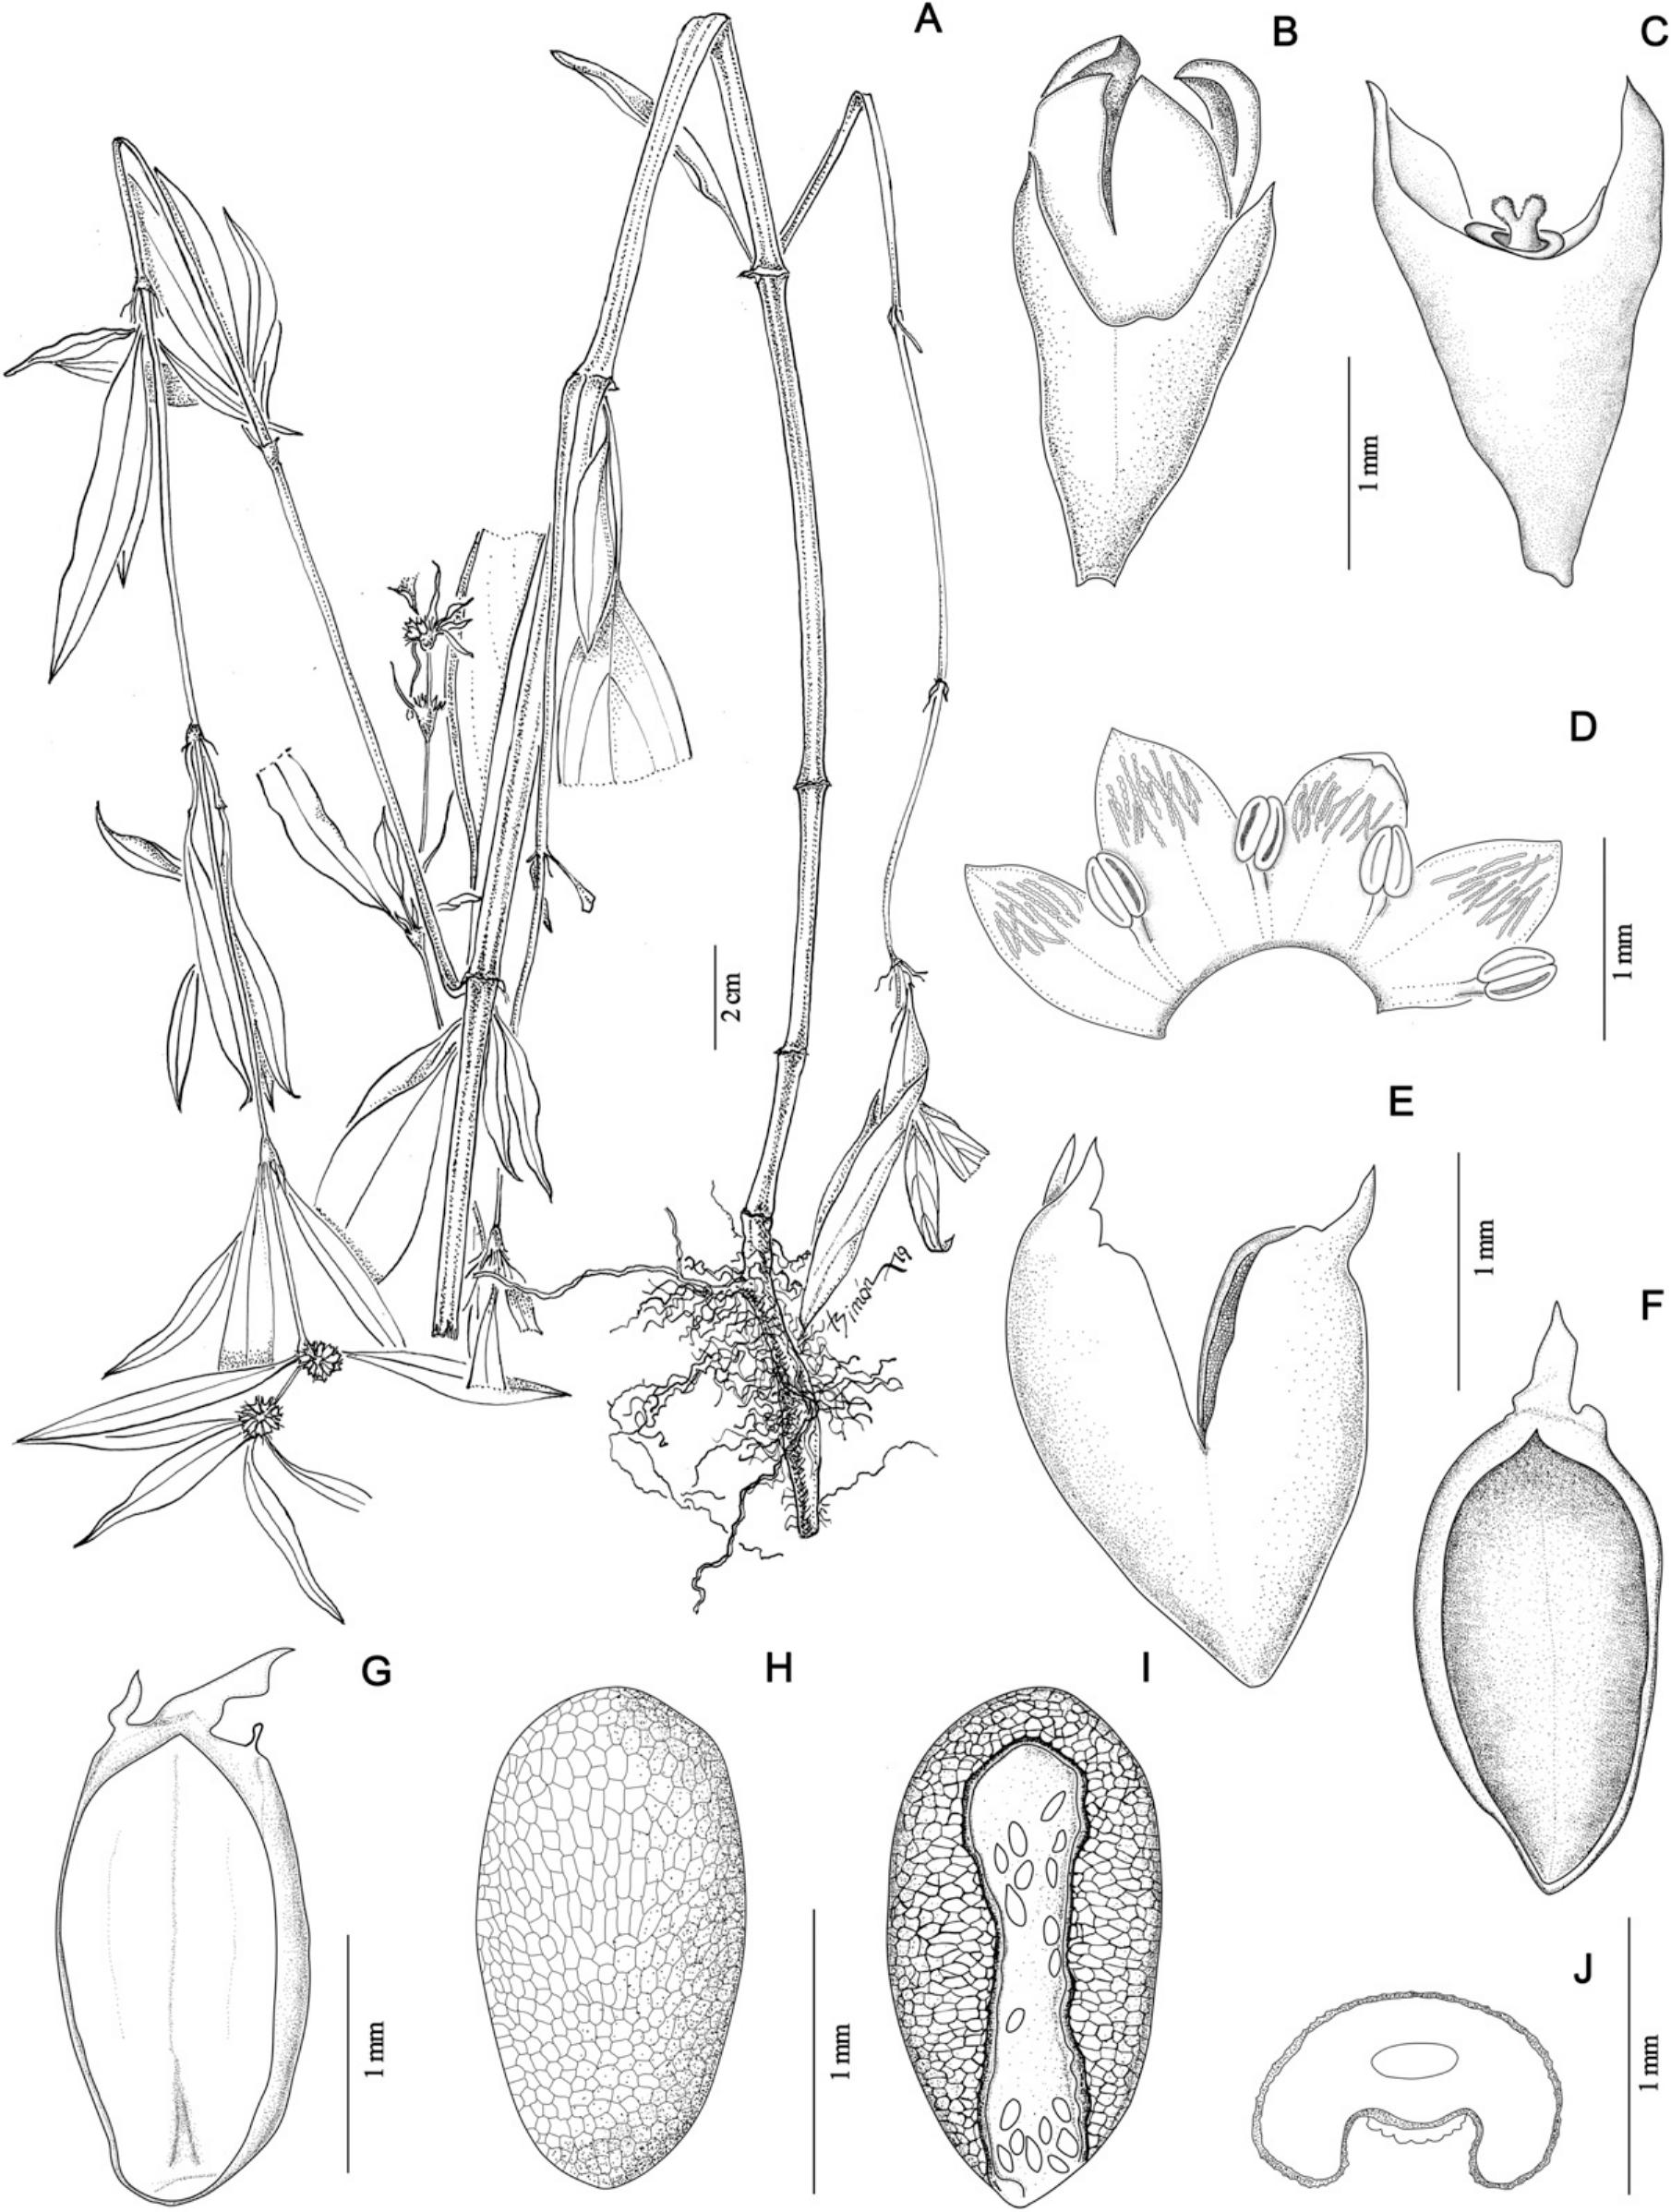 Integrative Taxonomic Analyses Sheds Light on Three Historically Disputed American Spermacoce and Key to the American Species of Spermacoce (Spermacoceae, Rubiaceae)